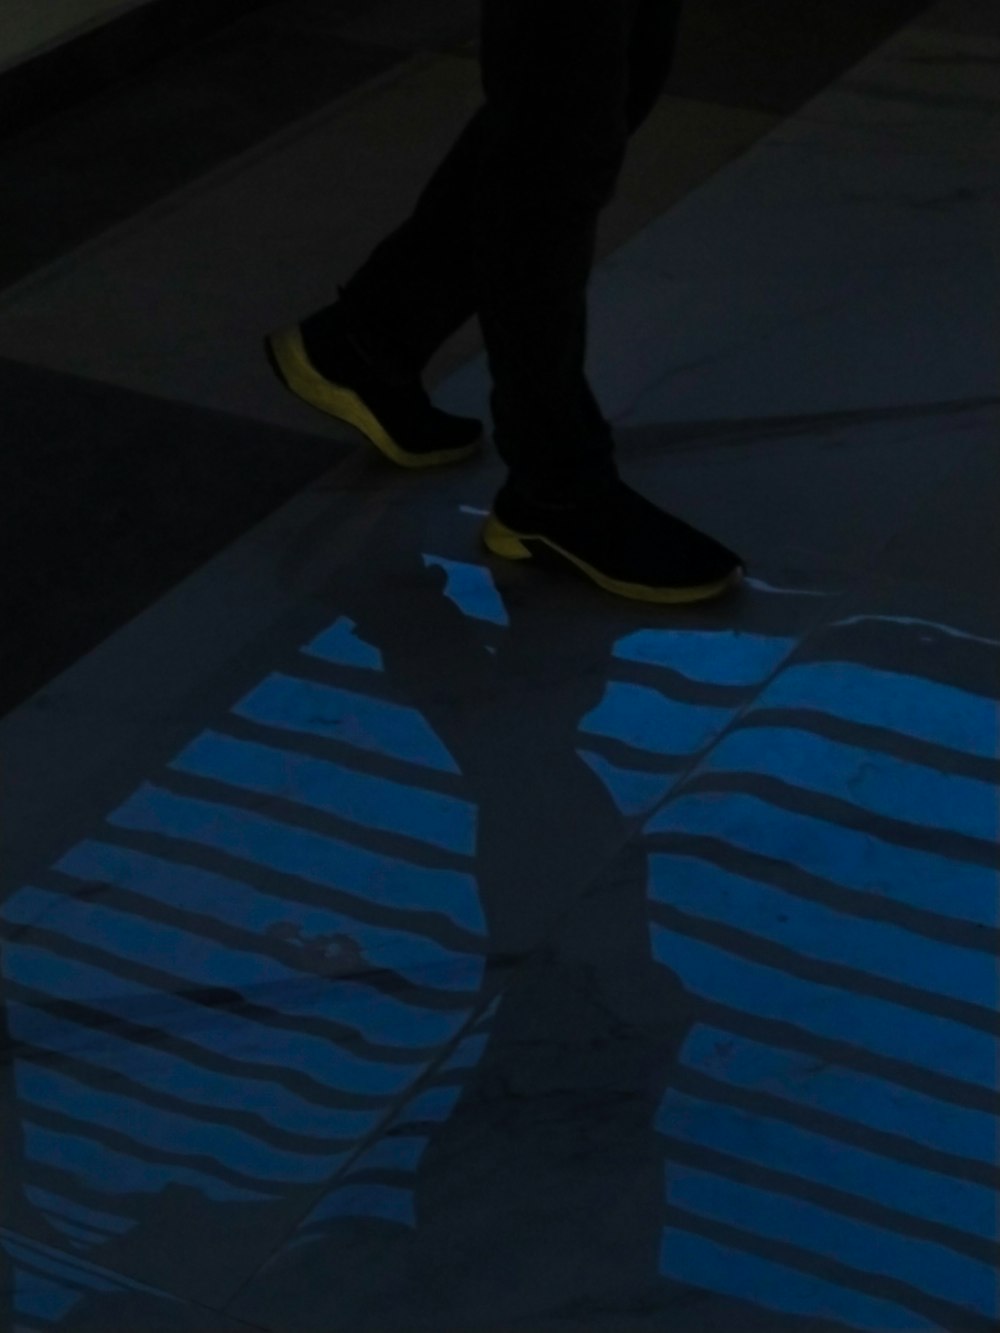 a person walking across a cross walk with their shoes on